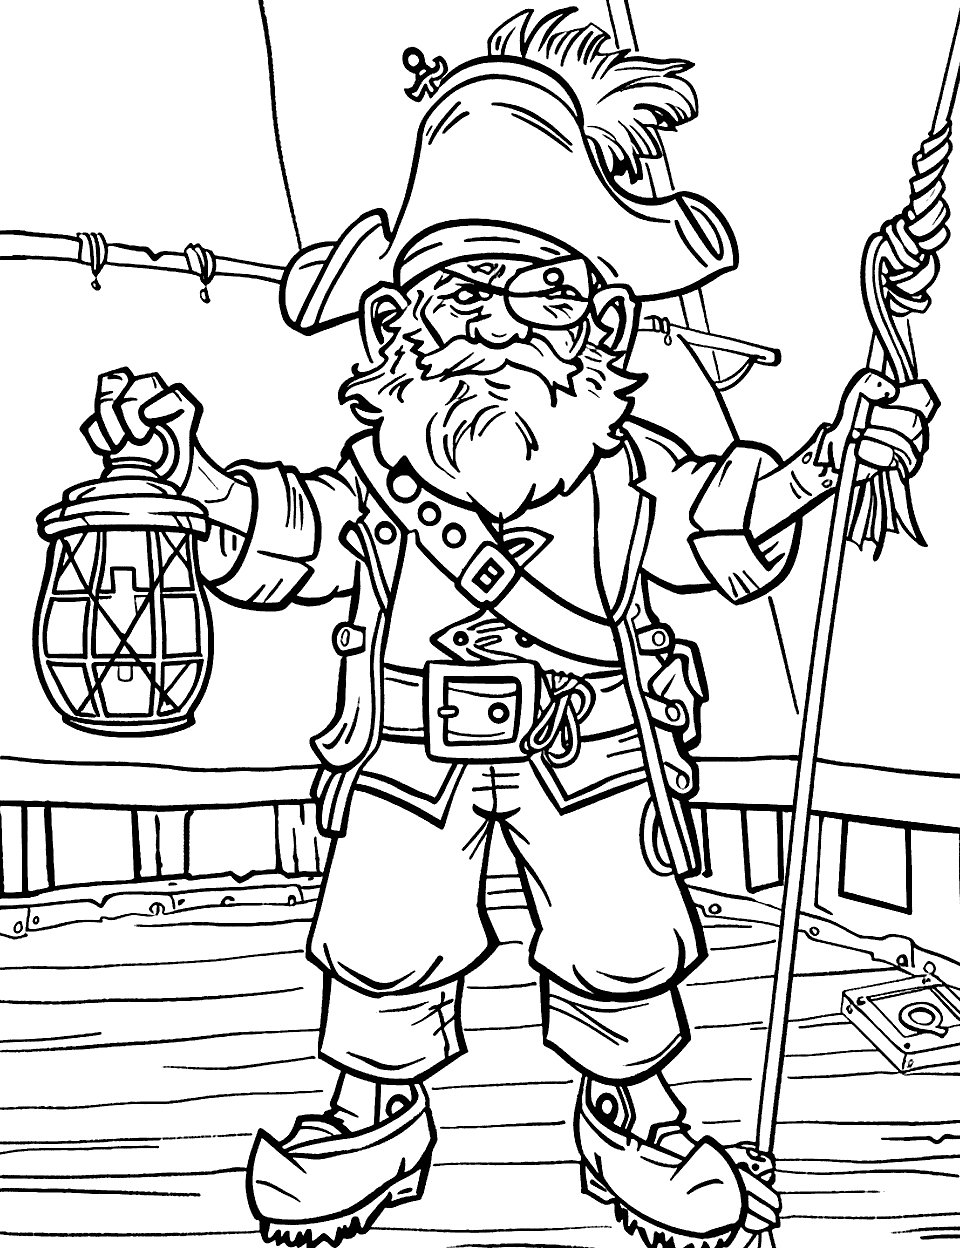 Pirate’s Lantern Night Pirate Coloring Page - A pirate holding a lantern on the deck of his ship.